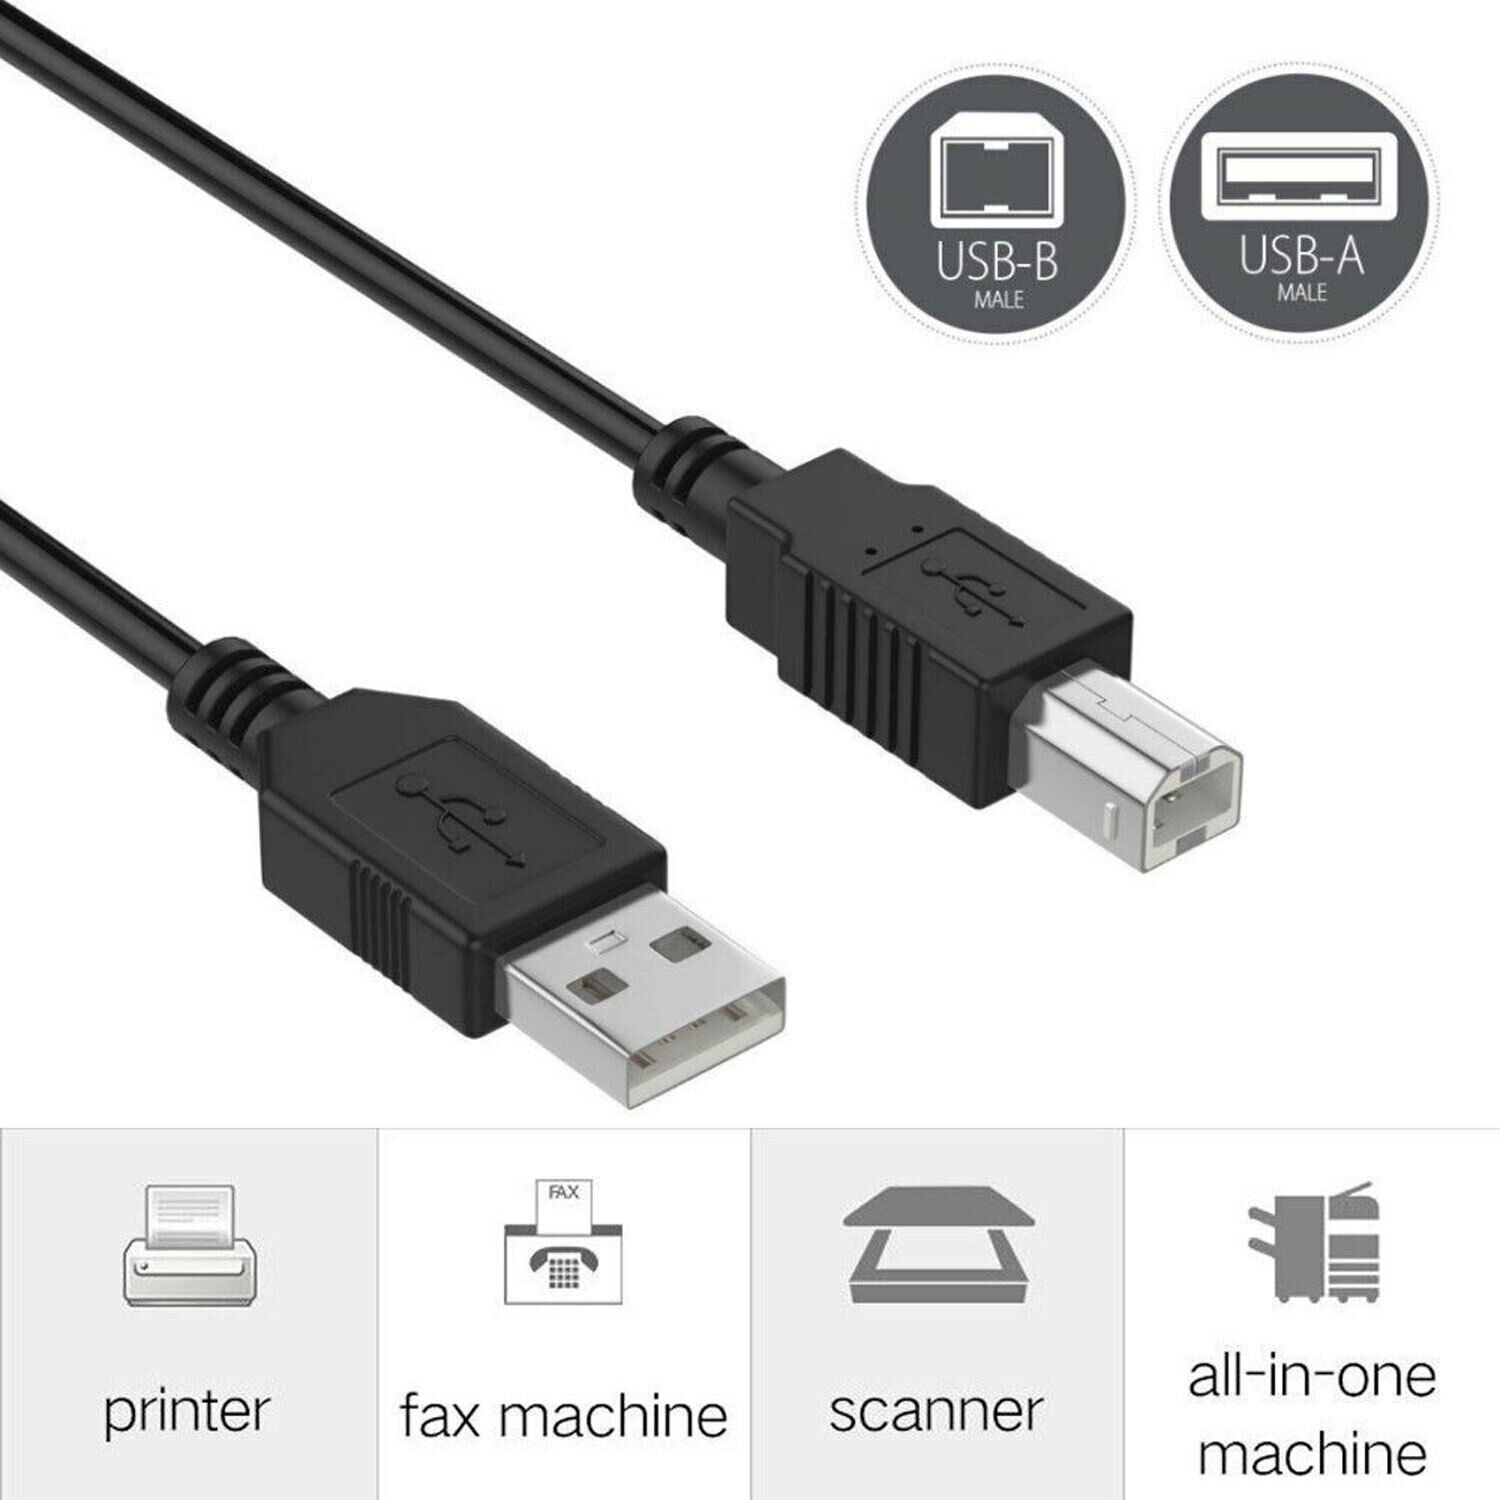 6ft USB 2.0 Cable Cord For BROTHER MFC-J497DW MFC-J650DW MFC-J675DW MFC-J870DW